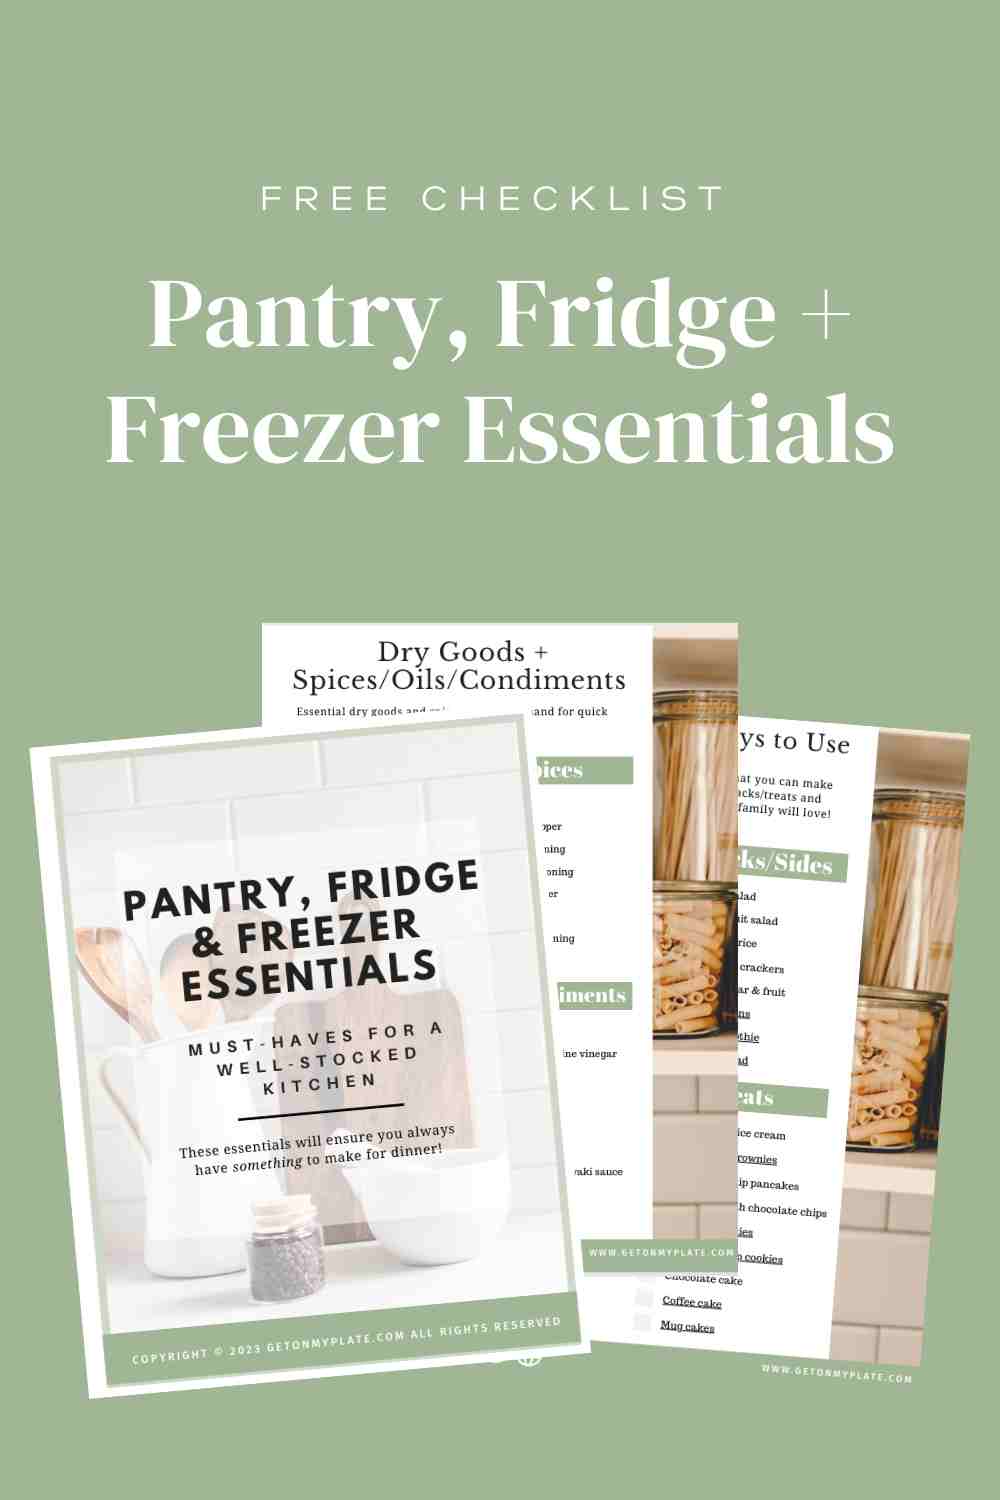 Screen shots for pantry fridge and freezer essentials.